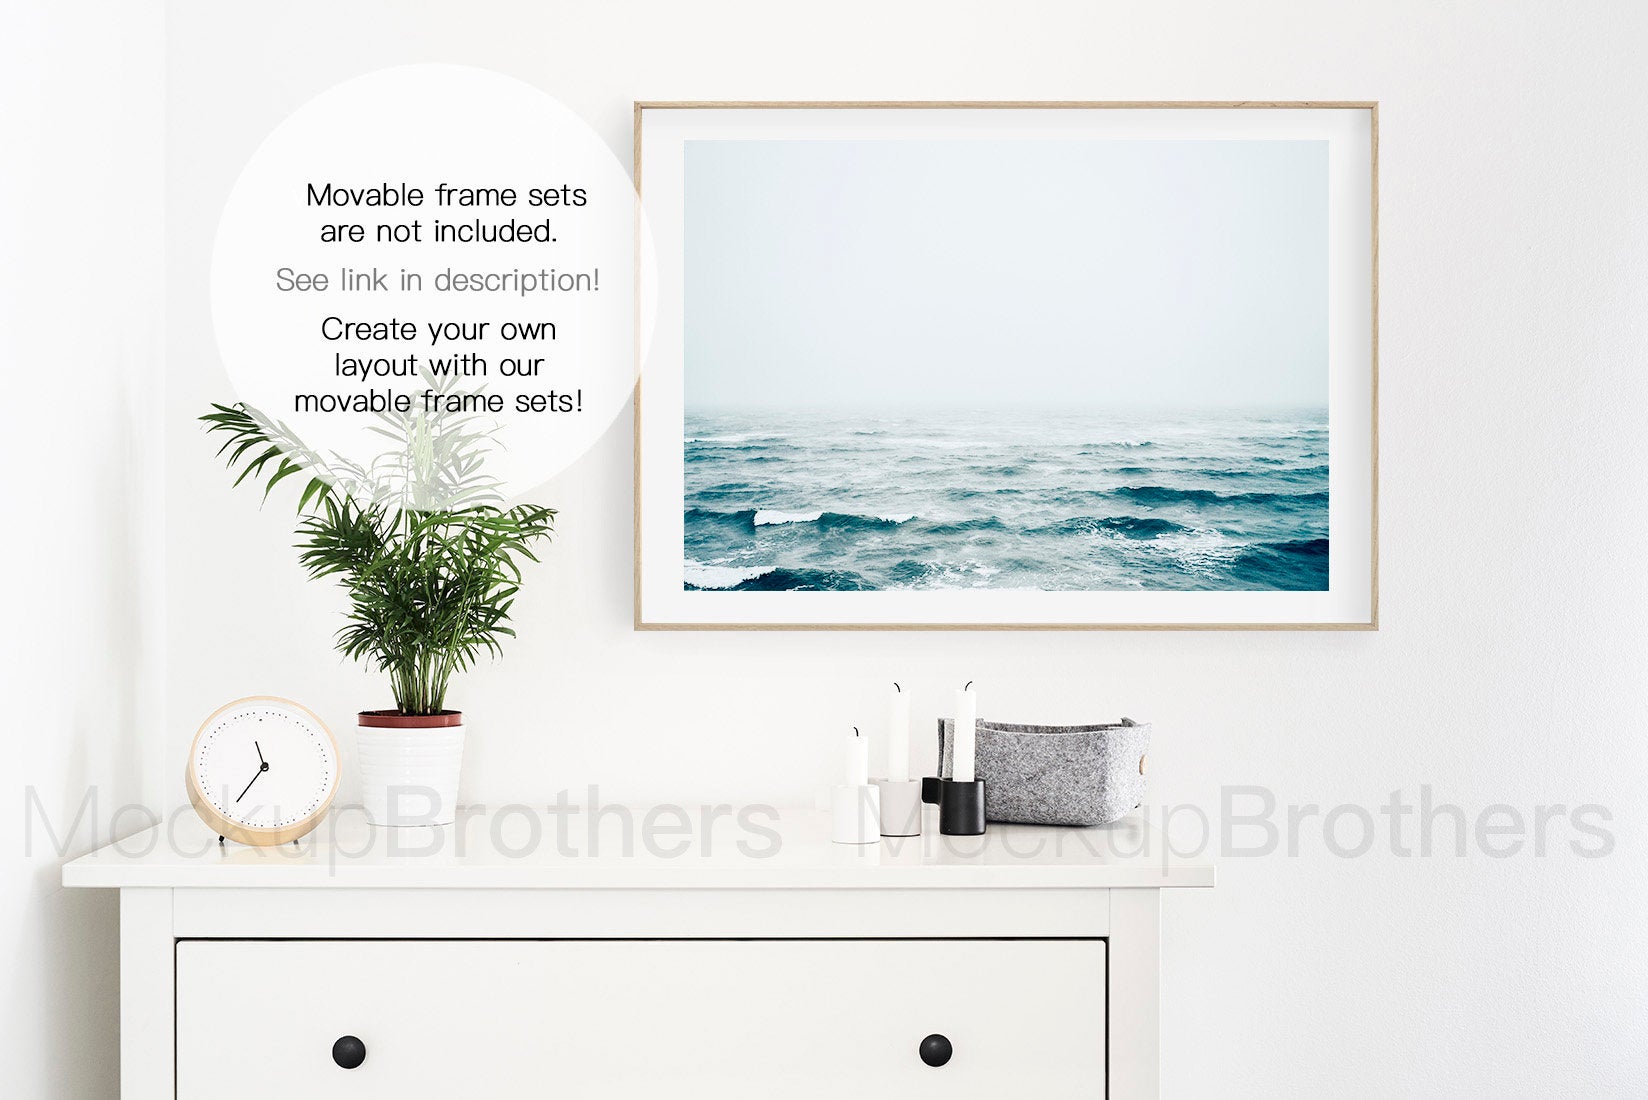 Frame mockup wall by mock up brothers